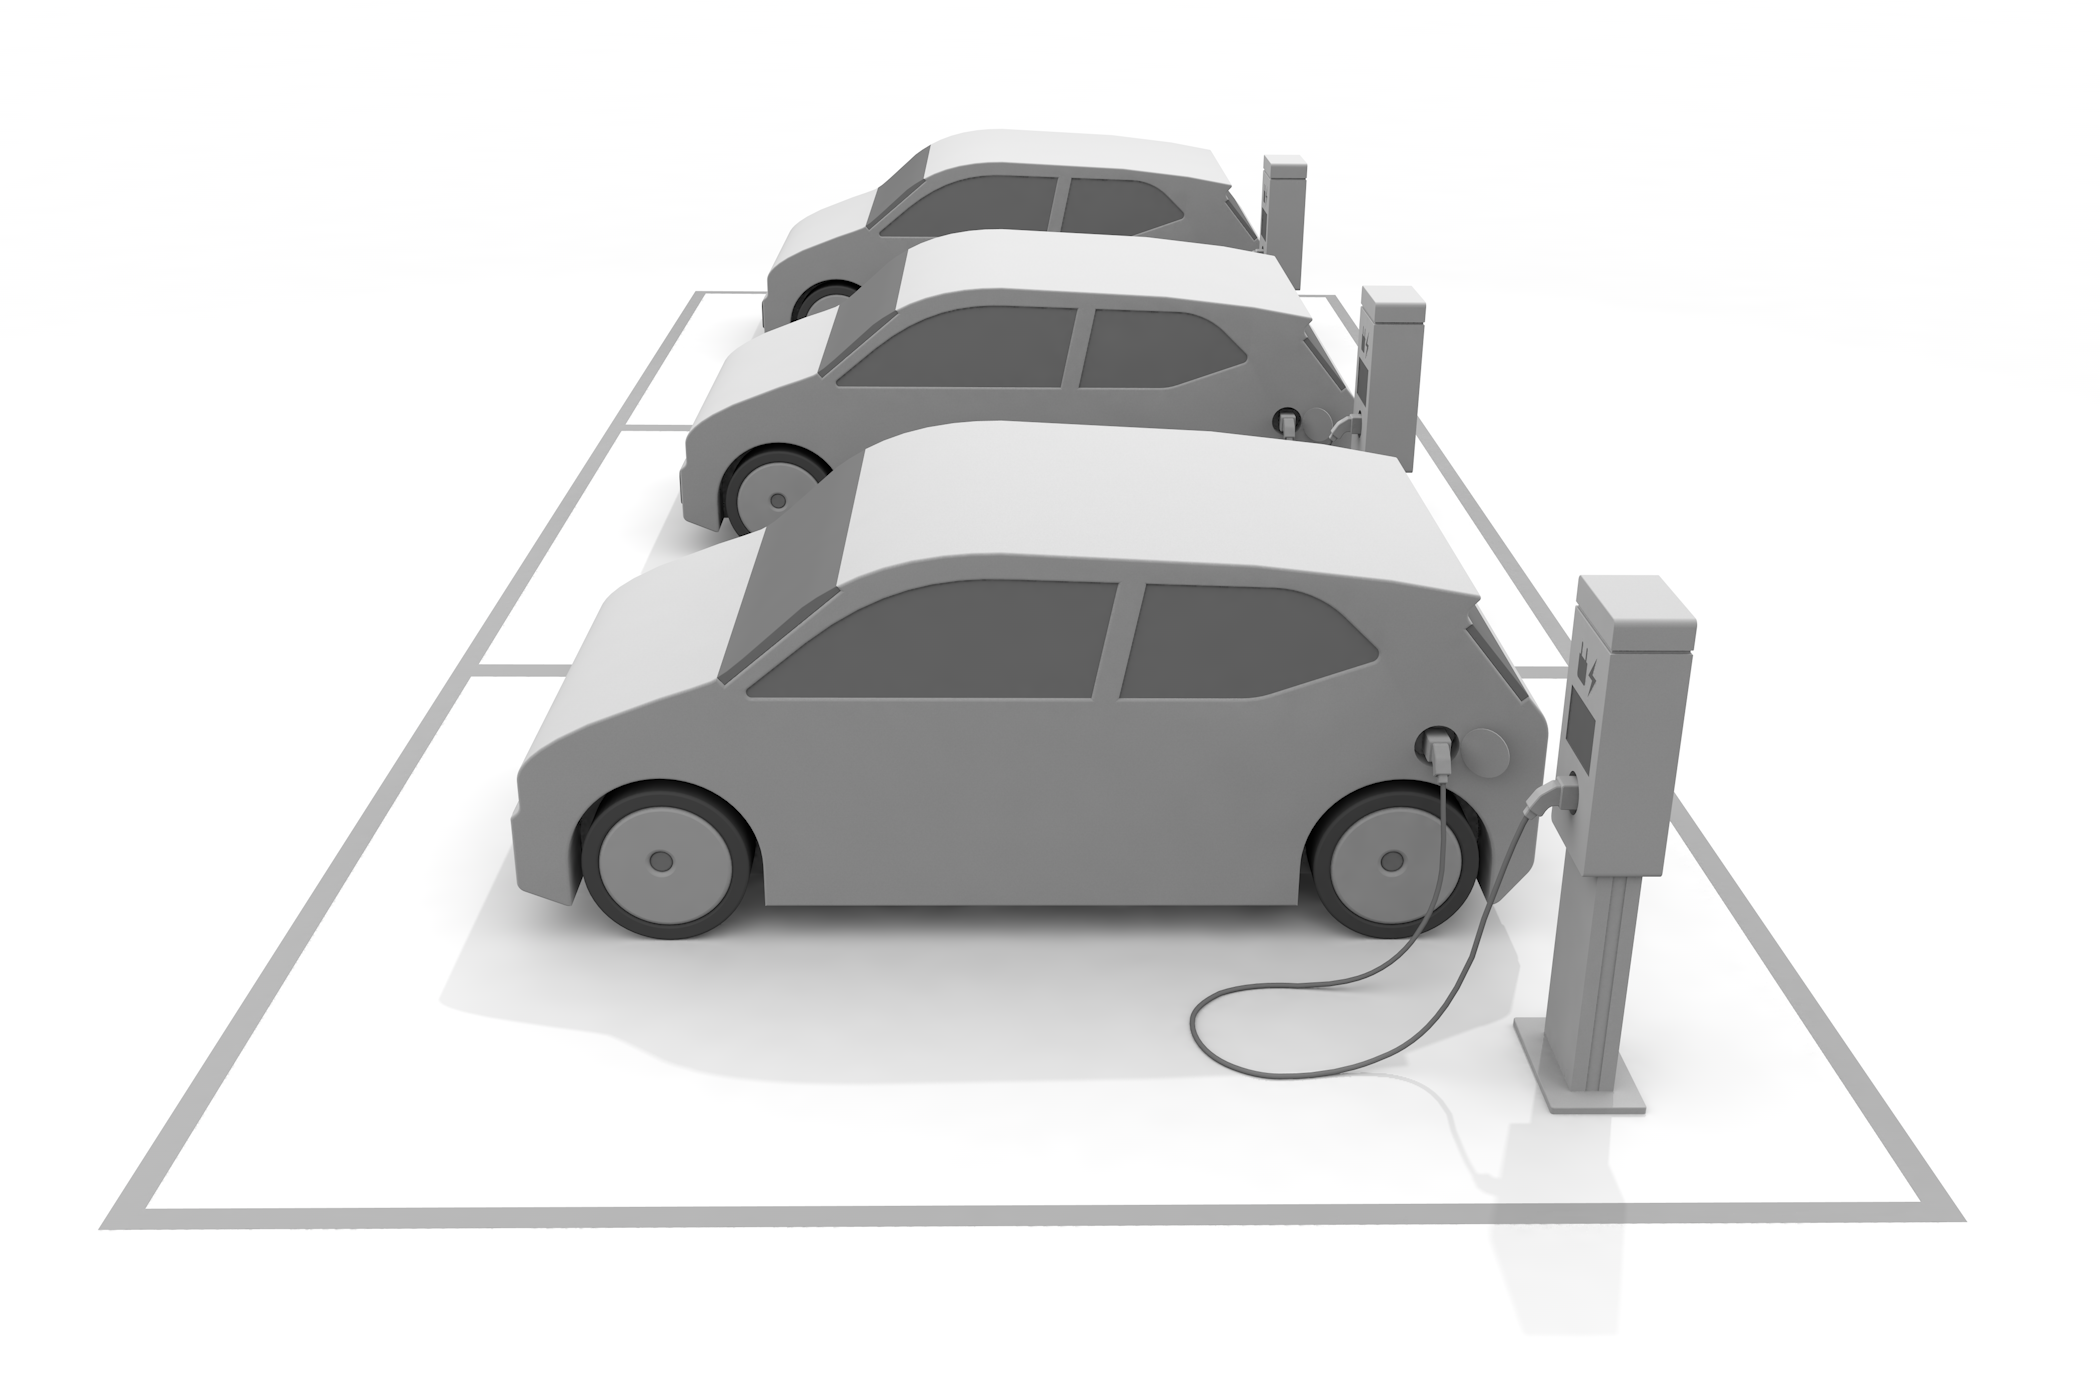 Car / Electric car / Battery / Decarbonized / EV / Semiconductor-Illustration / 3D rendering / Free material / Commercial use OK